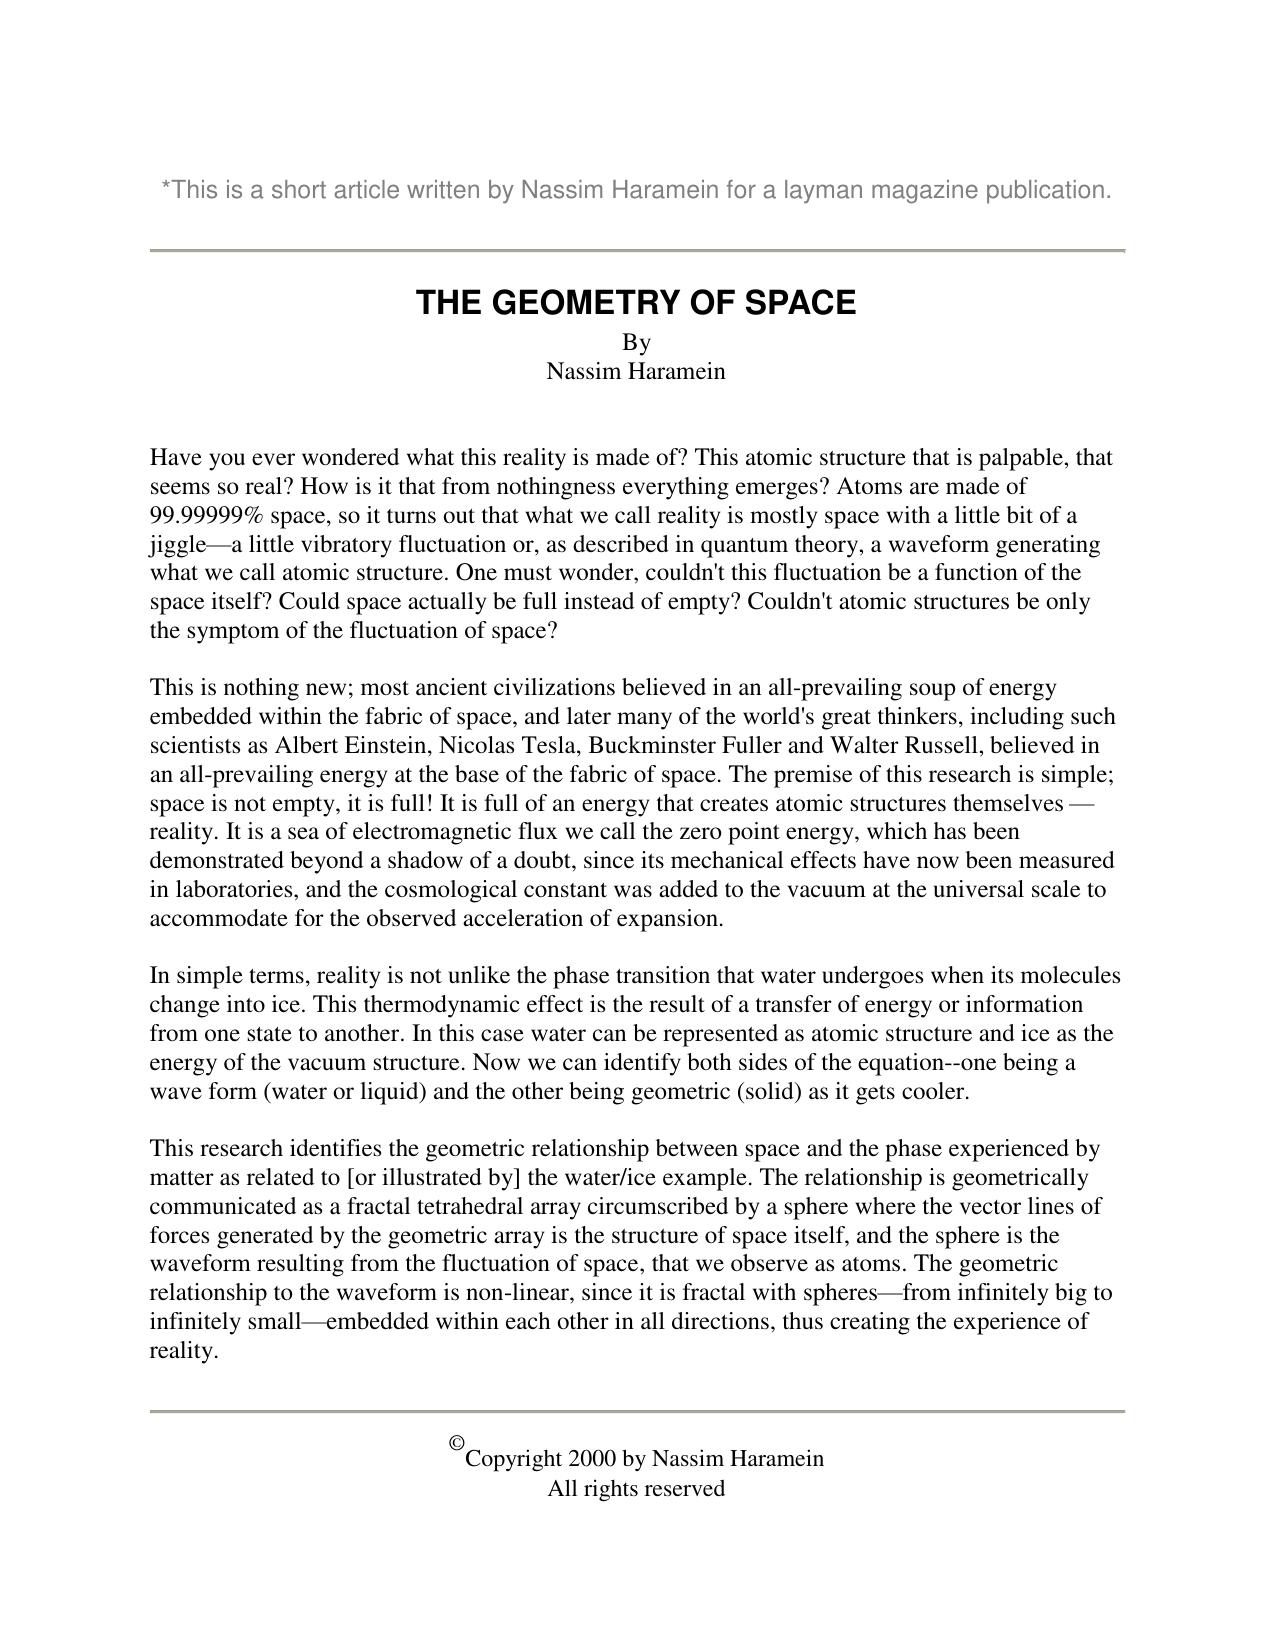 The Geometry of Space - Paper